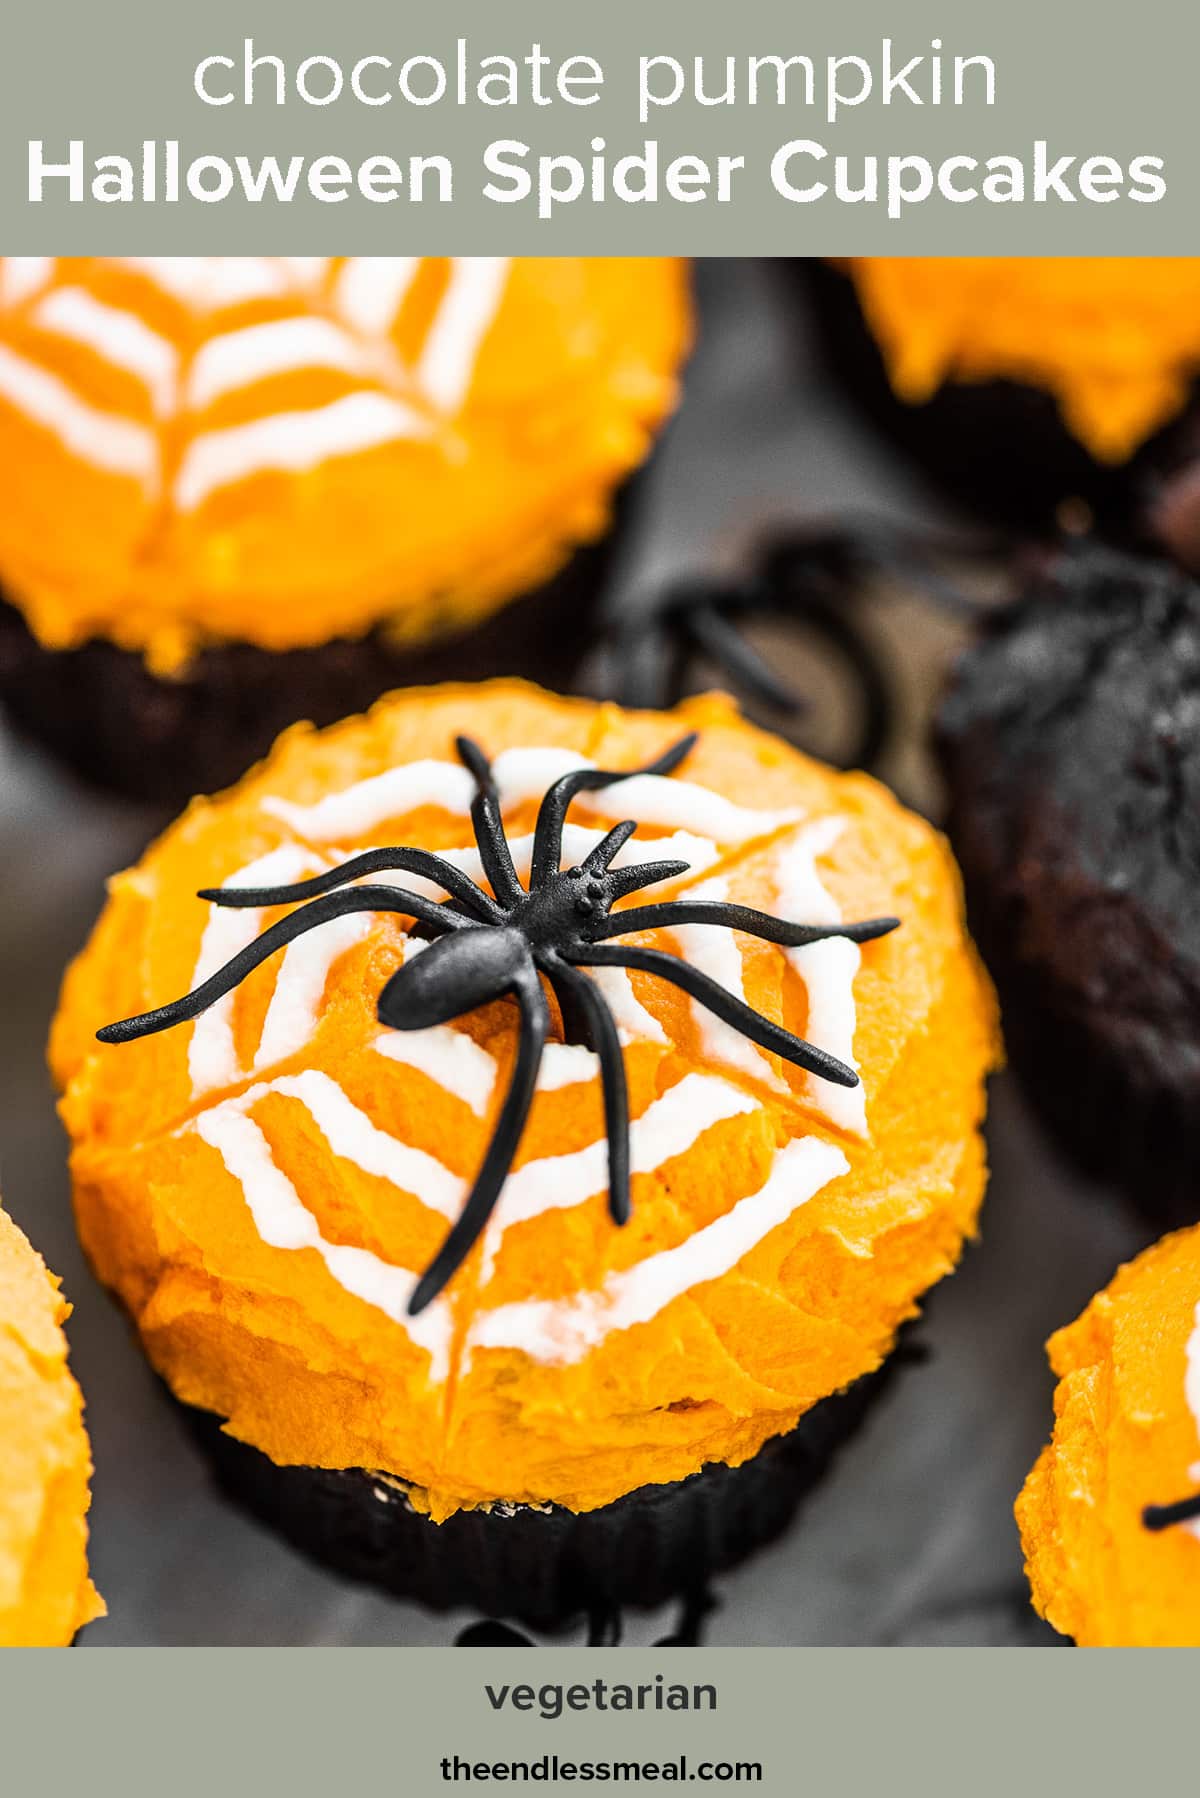 Pumpkin chocolate cupcakes decorated with orange icing an a spider web and spider on top and the recipe title on the picture.